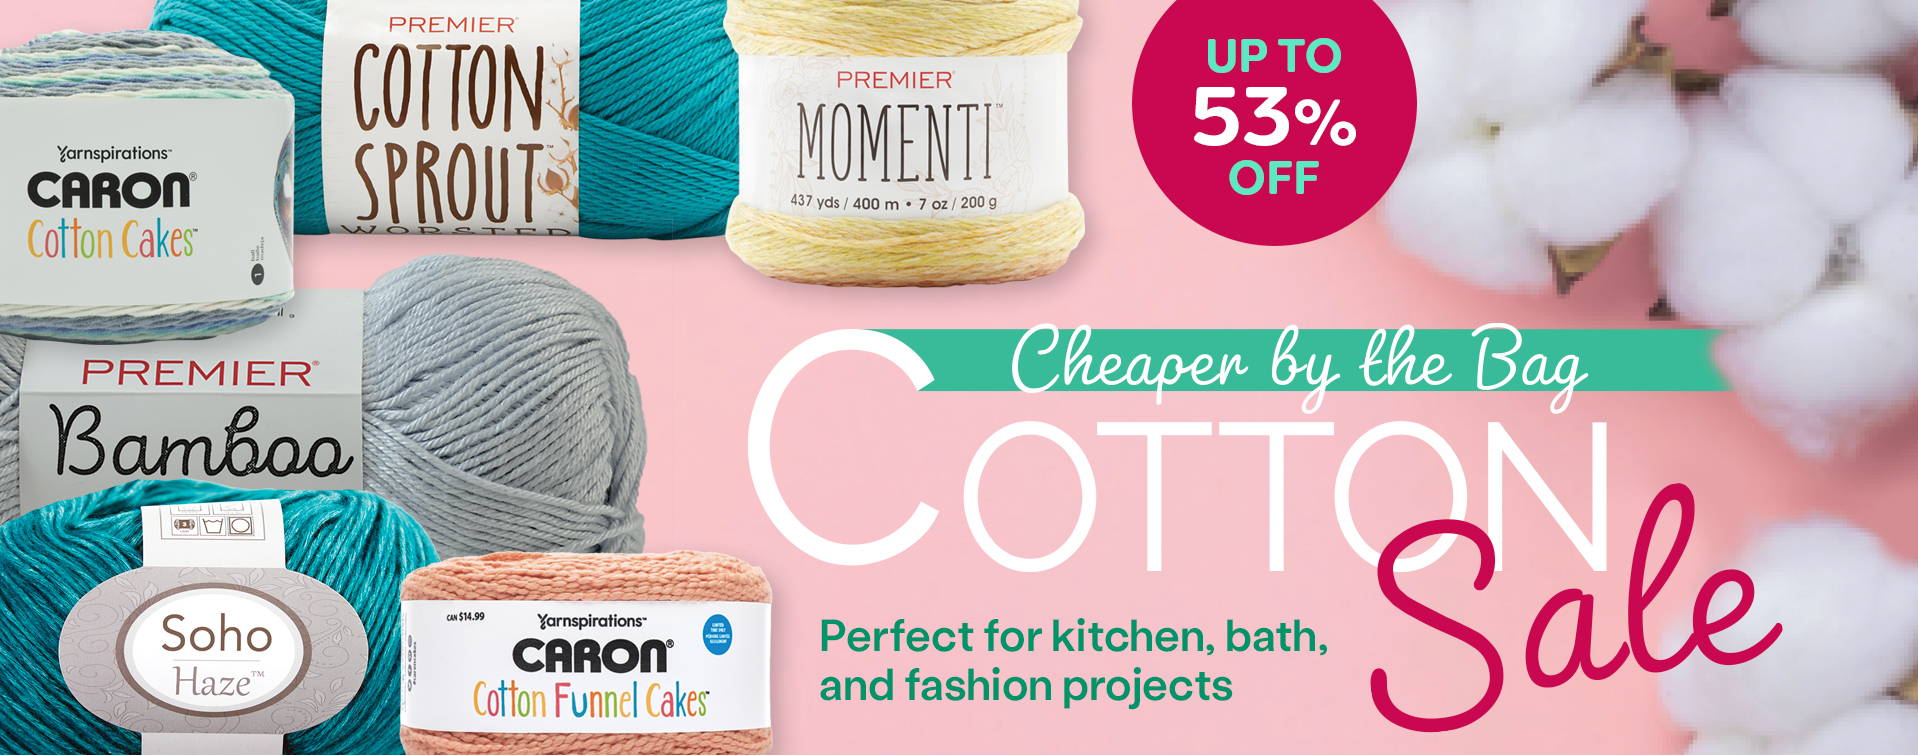 Cheaper by the Bag - Cotton Yarn Sale Up to 53% Off. Images: Featured Cotton Yarns.